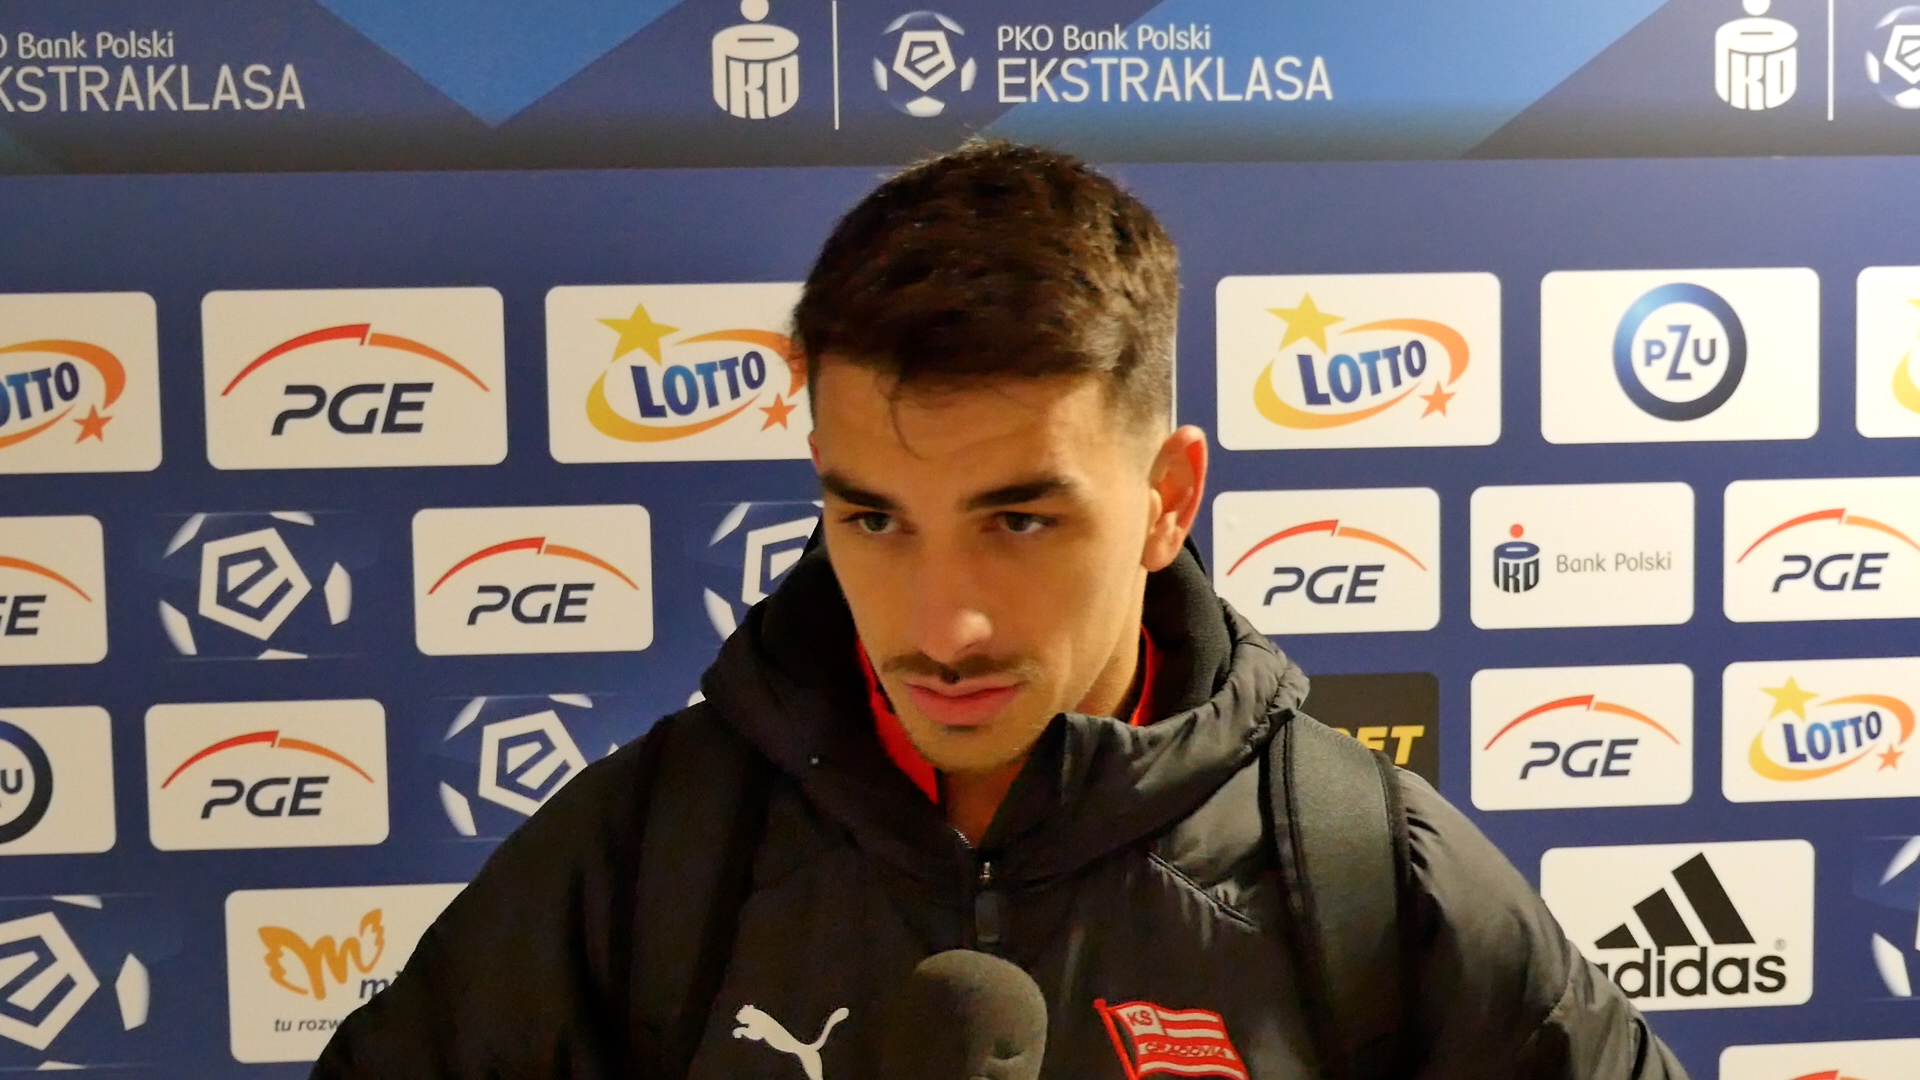 S. Hanca: We showed, that we are a team